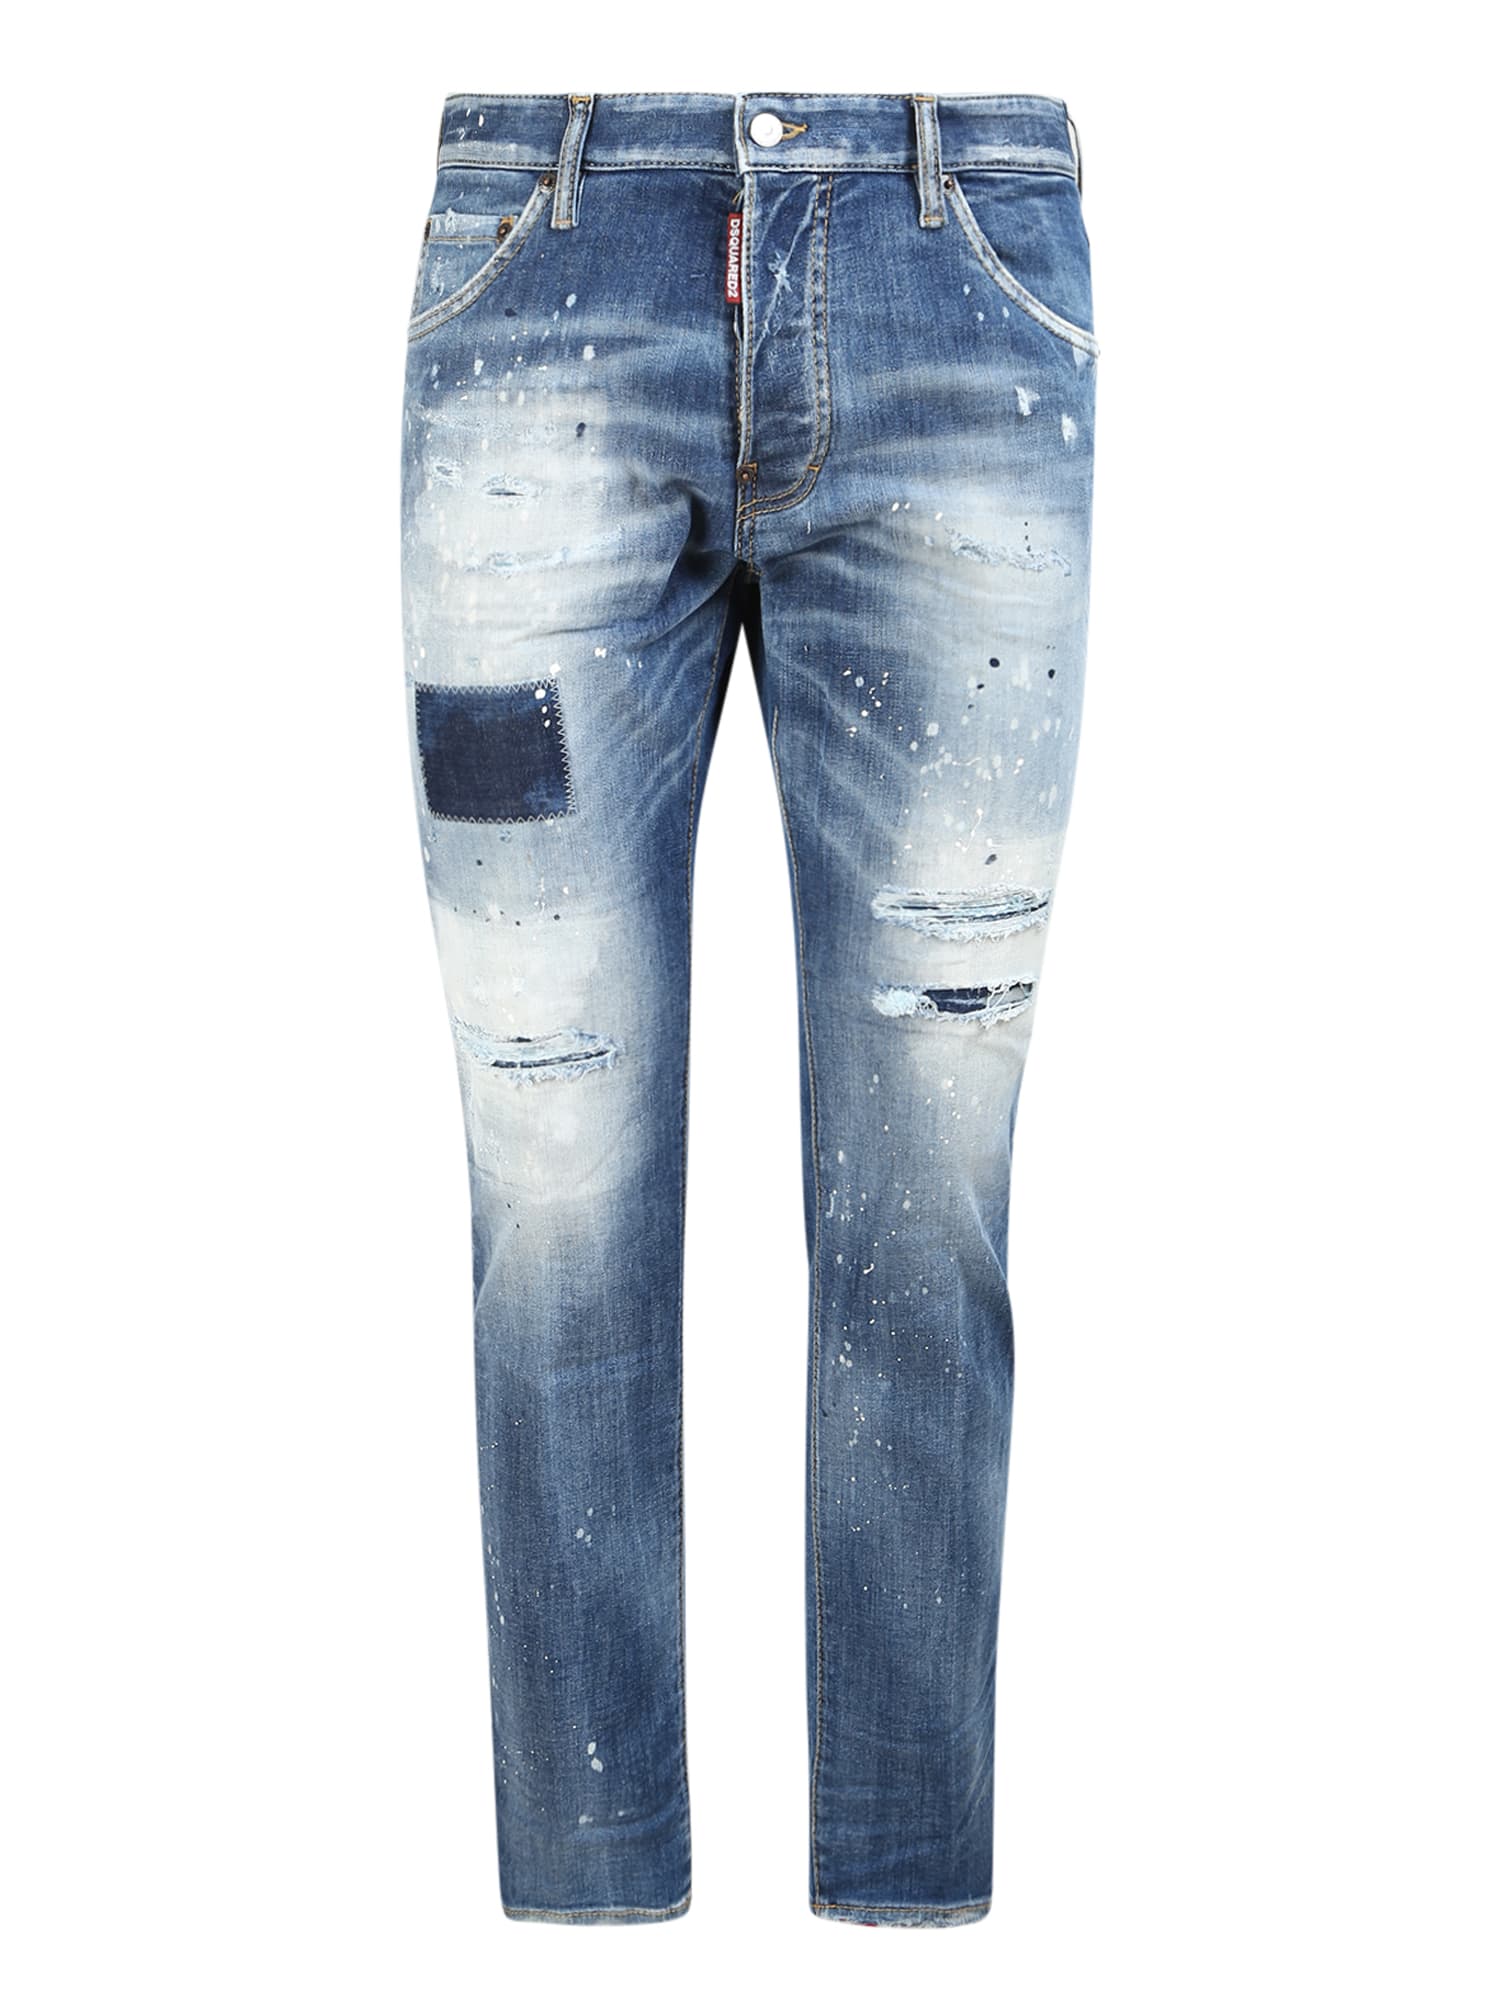 Dsquared2 Denim Garments Are The Strong Point Of The Maison: These Jeans With Ripped And Paint- Splatter Details Are A Must-have